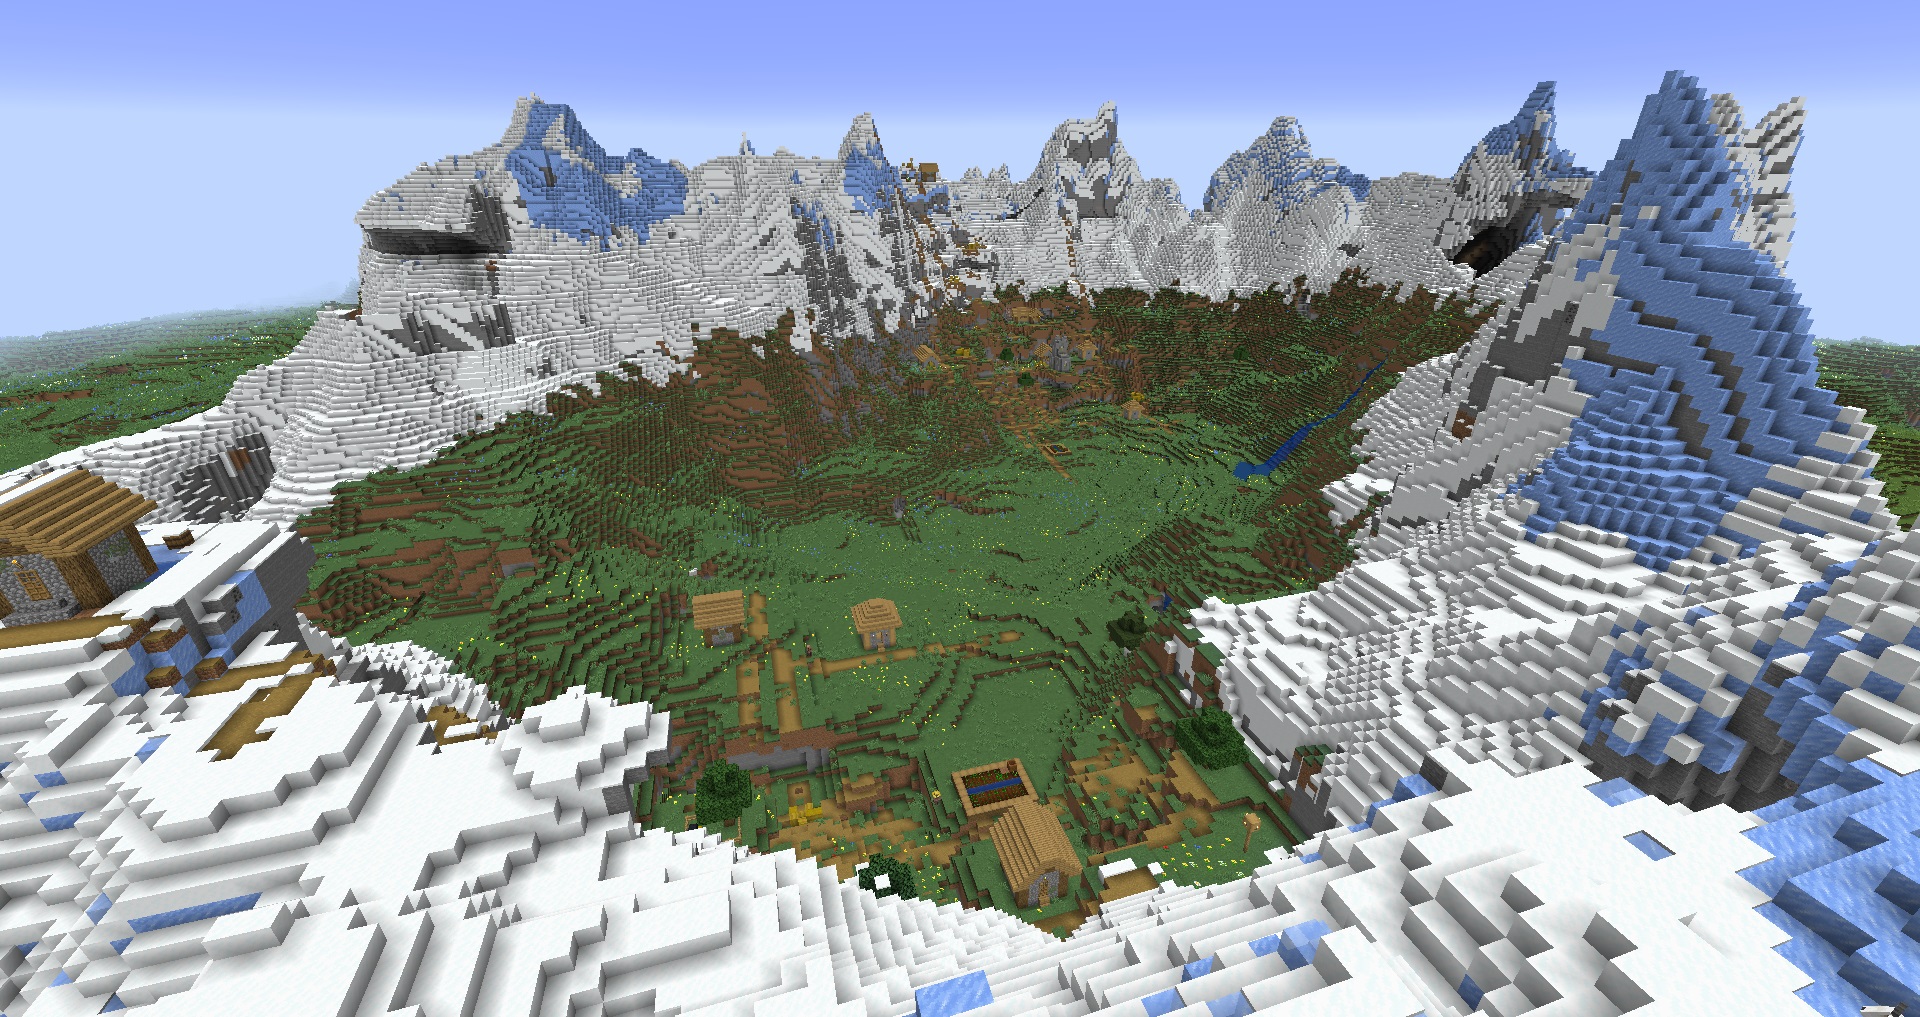 I made these photos of my Minecraft world with the new 1.18 update